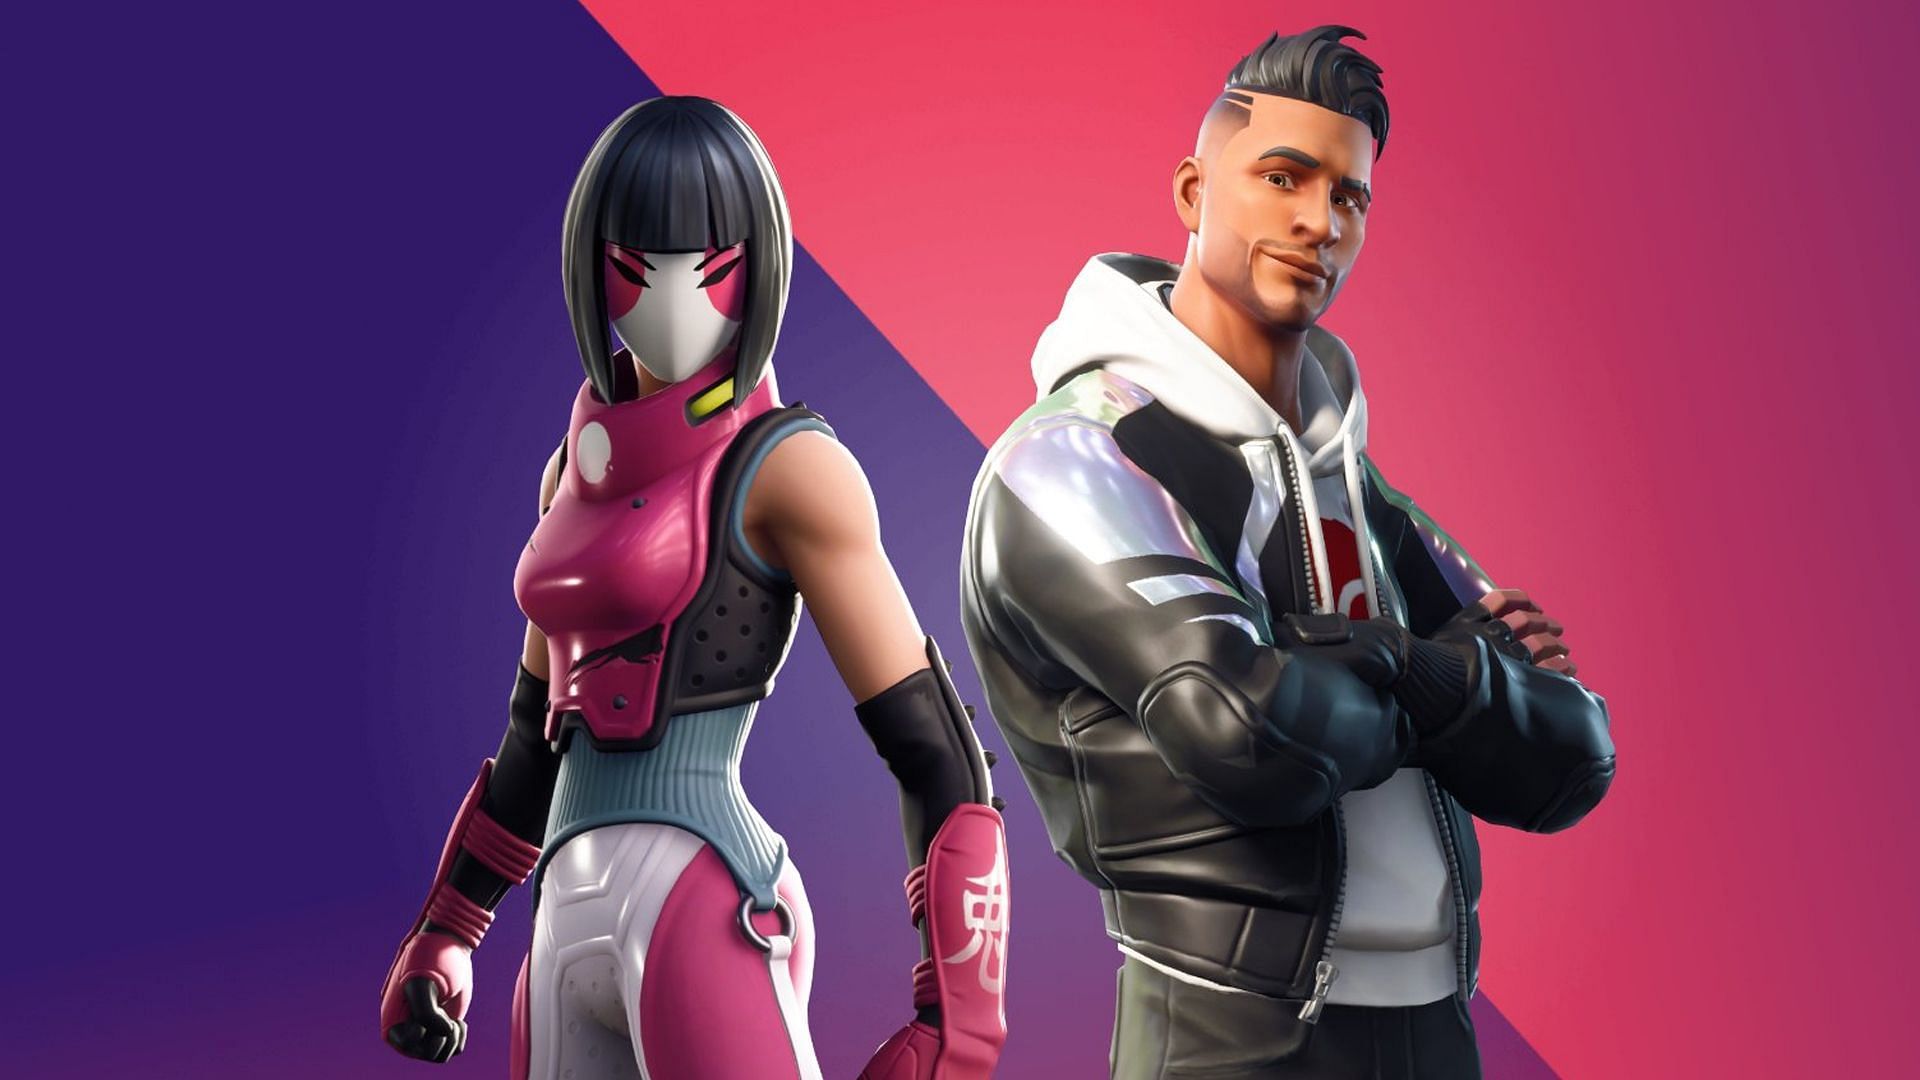 Fortnite players can earn another free cosmetic item by completing challenges (Image via Epic Games)